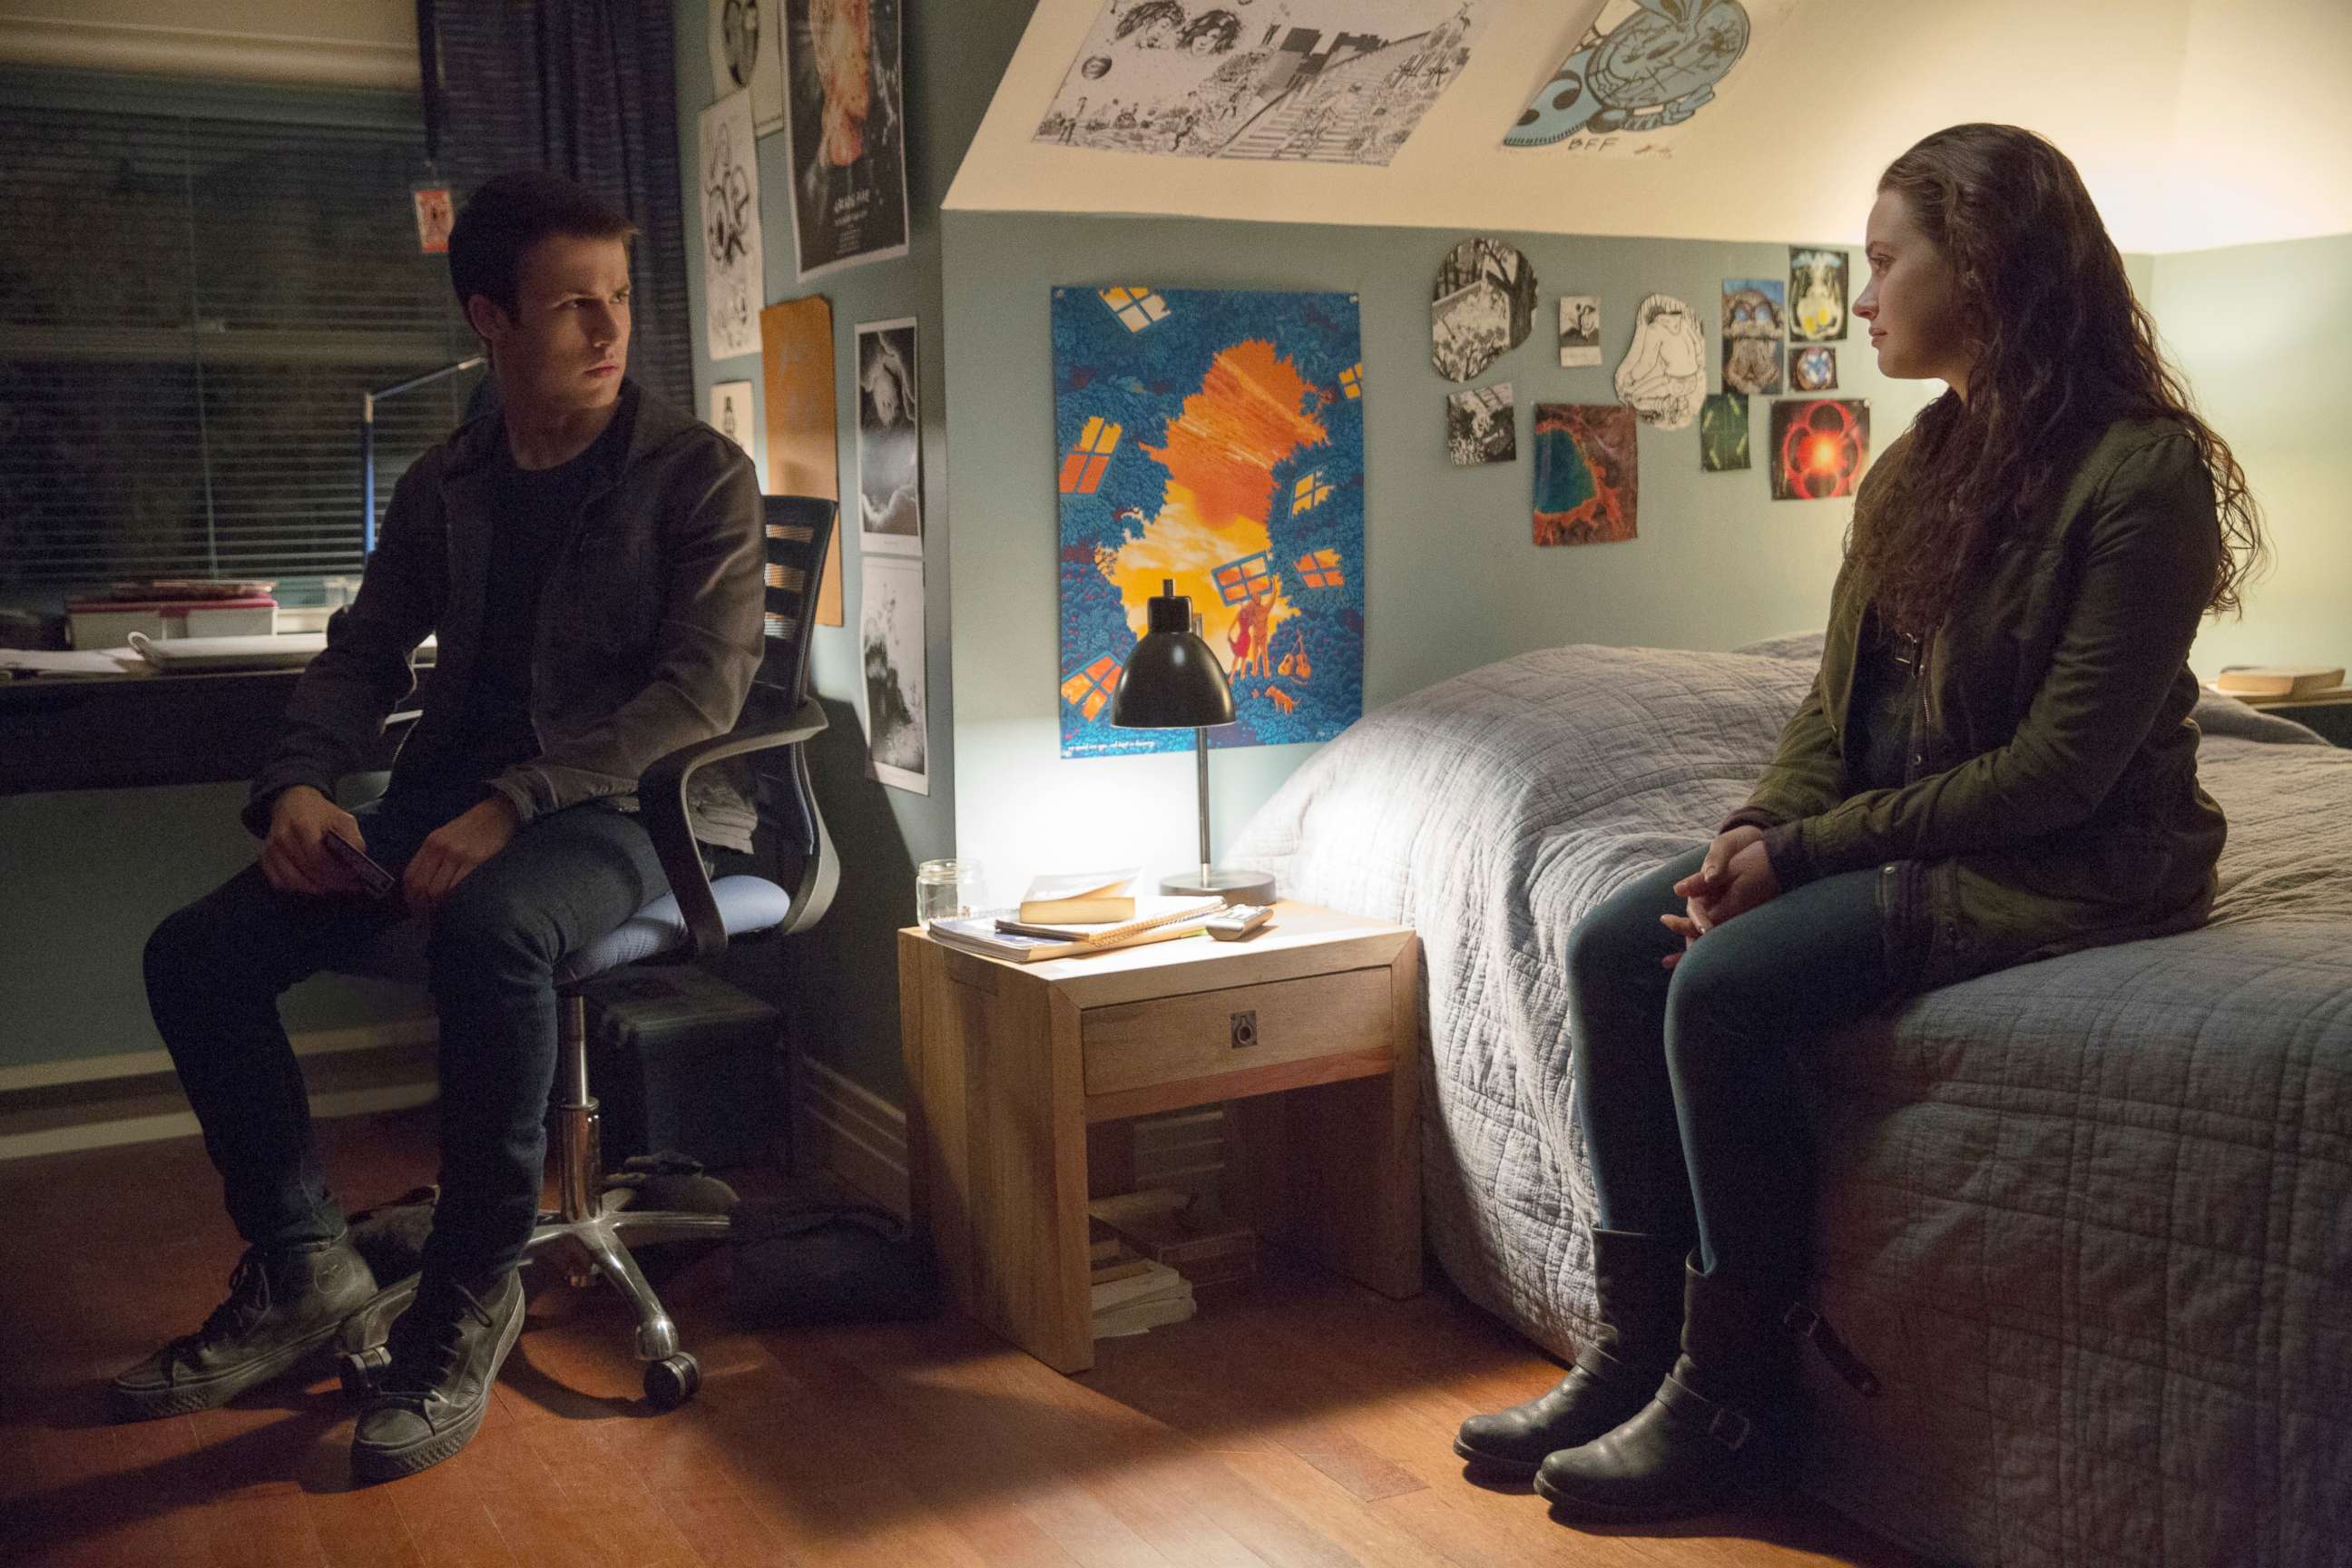 PHOTO: Scene from the Netflix series "13 Reasons Why."